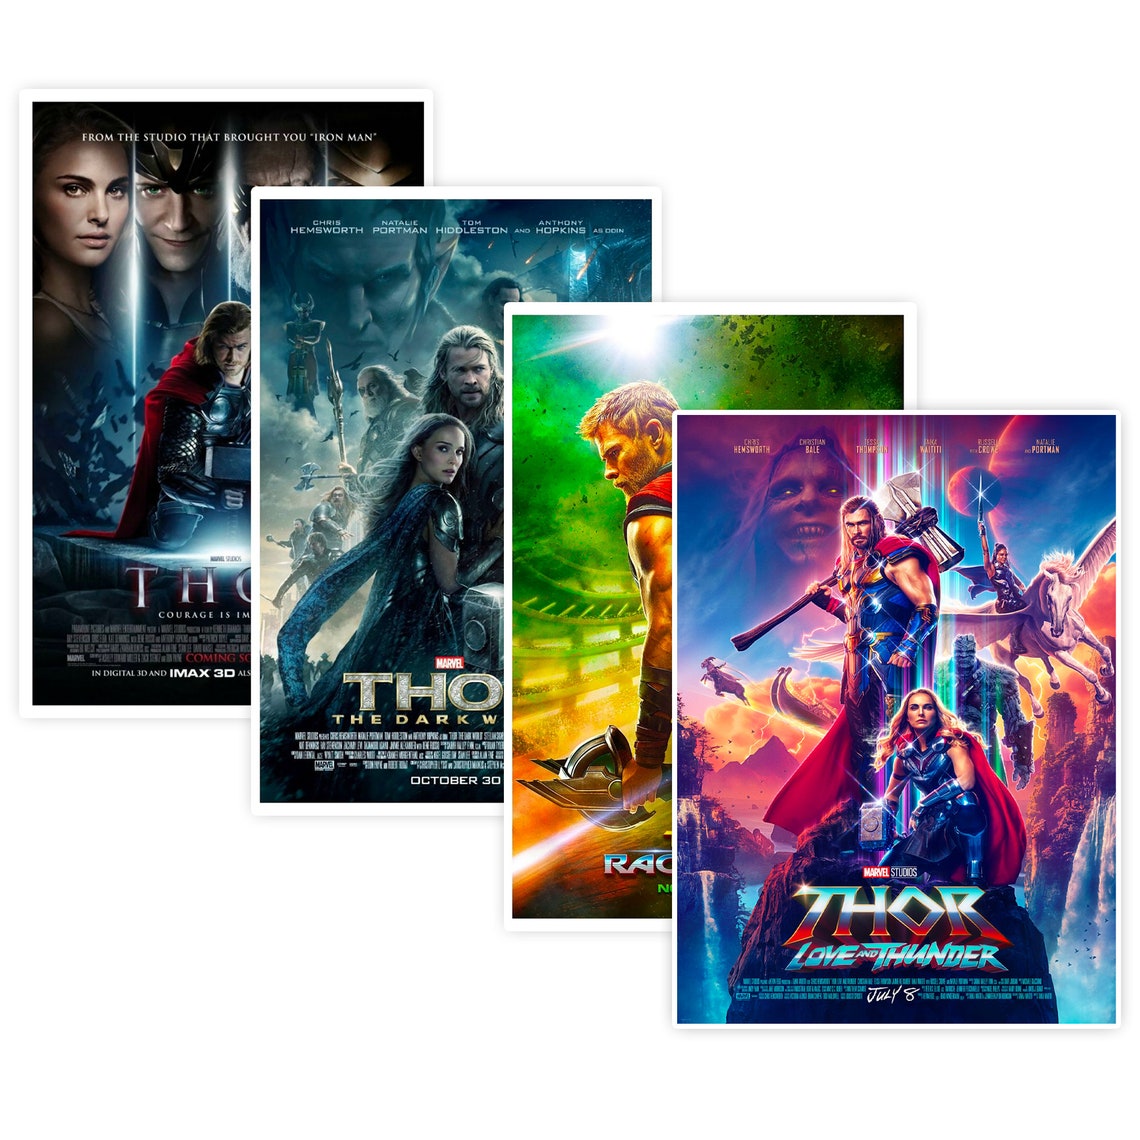 Thor 1 2 3 4 Poster Canvas, Thor 4 Poster, Thor Love and Thungder new Poster, Thor wall art, Poster Fan 